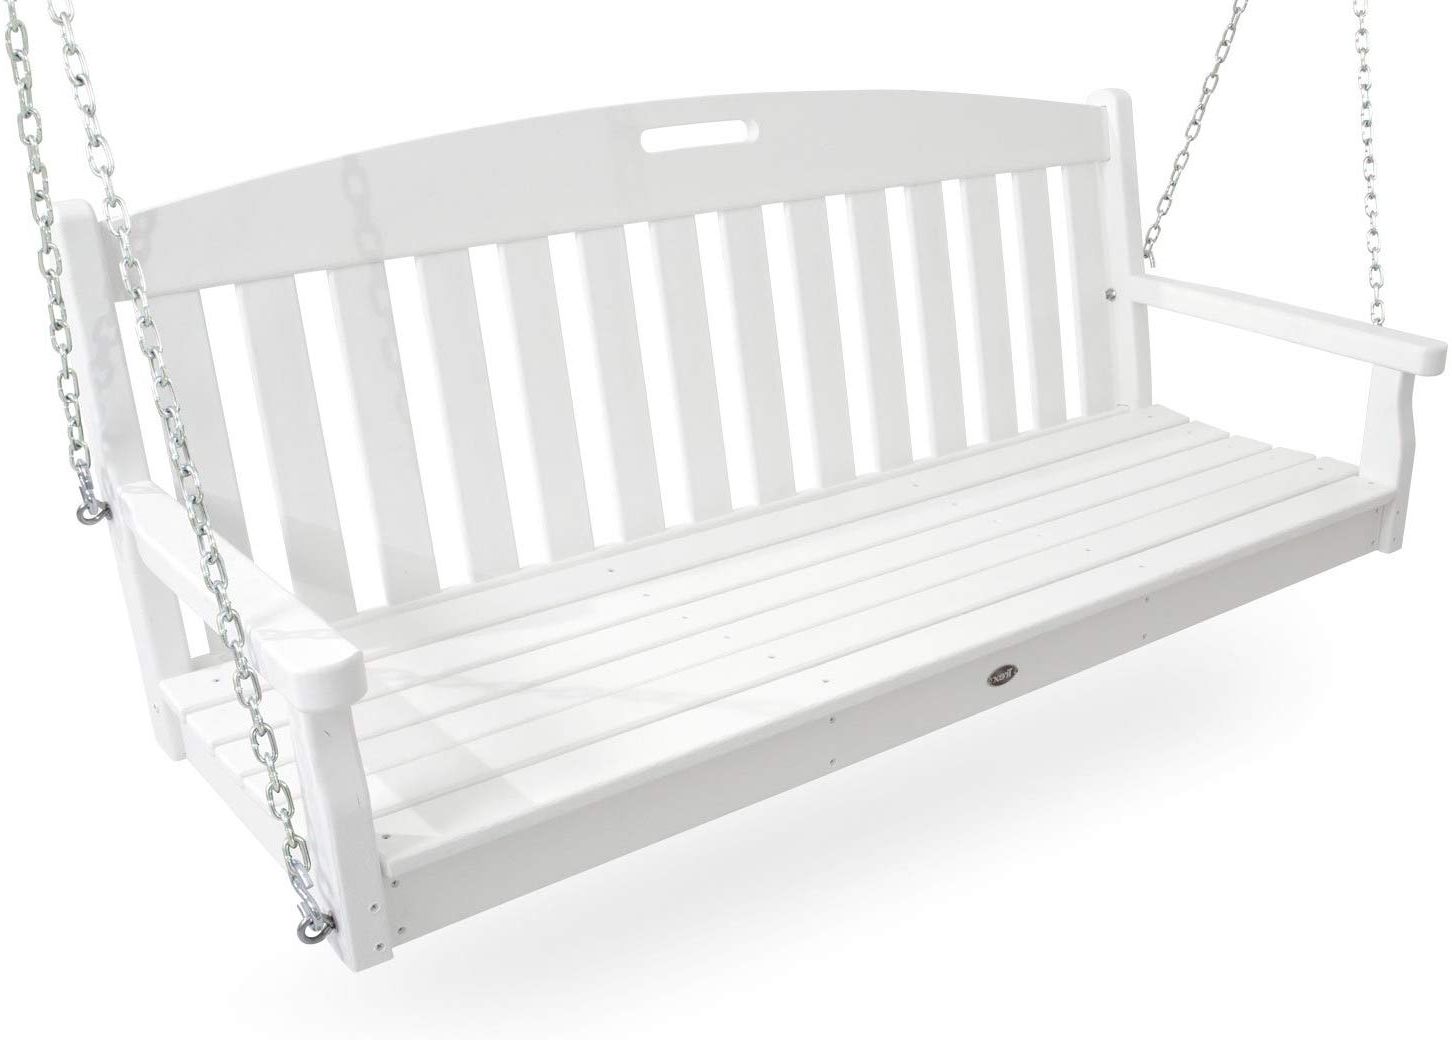 Trendy Outdoor Furniture yacht Club 2 Person Recycled Plastic Outdoor Swings With Trex Outdoor Furniture Yacht Club Swing, Classic White (View 3 of 30)